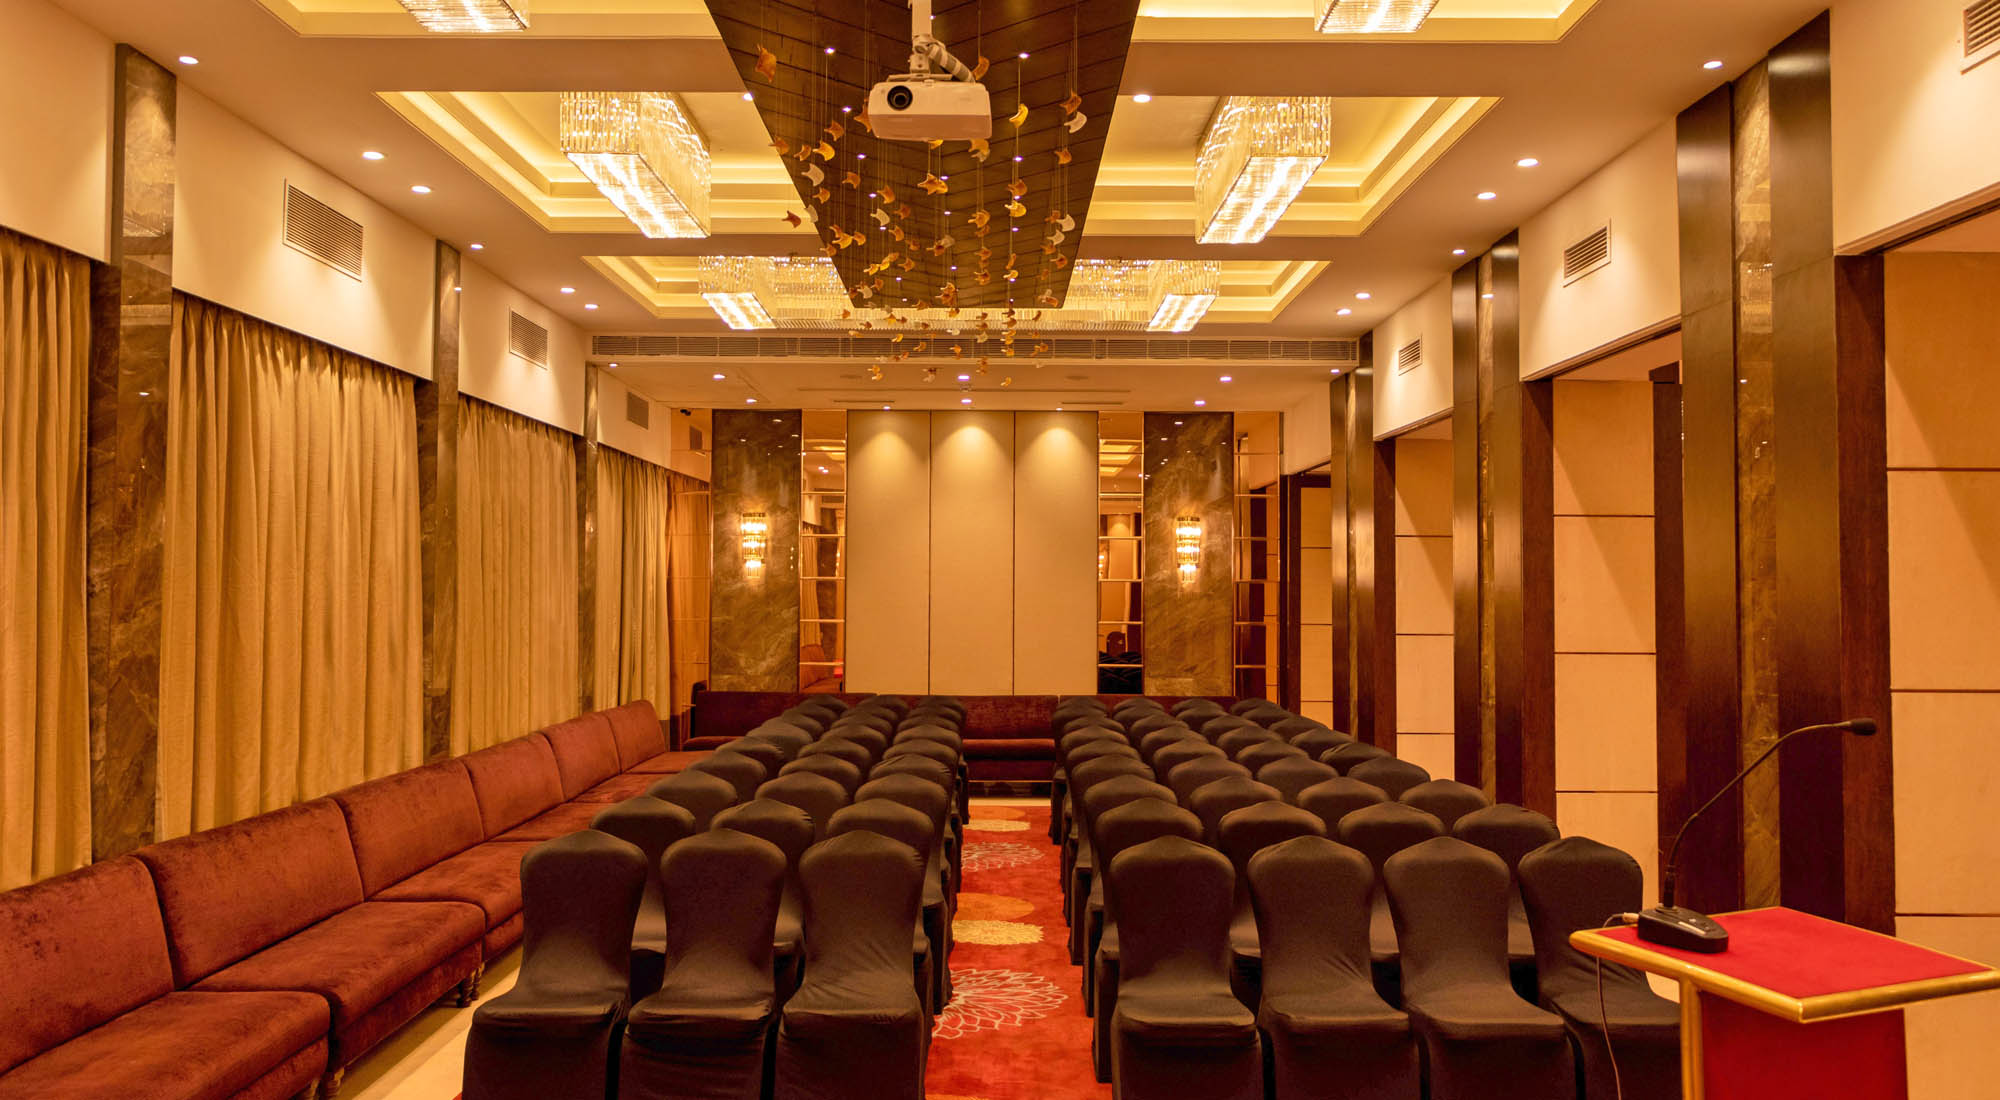 ac banquet hall in kota